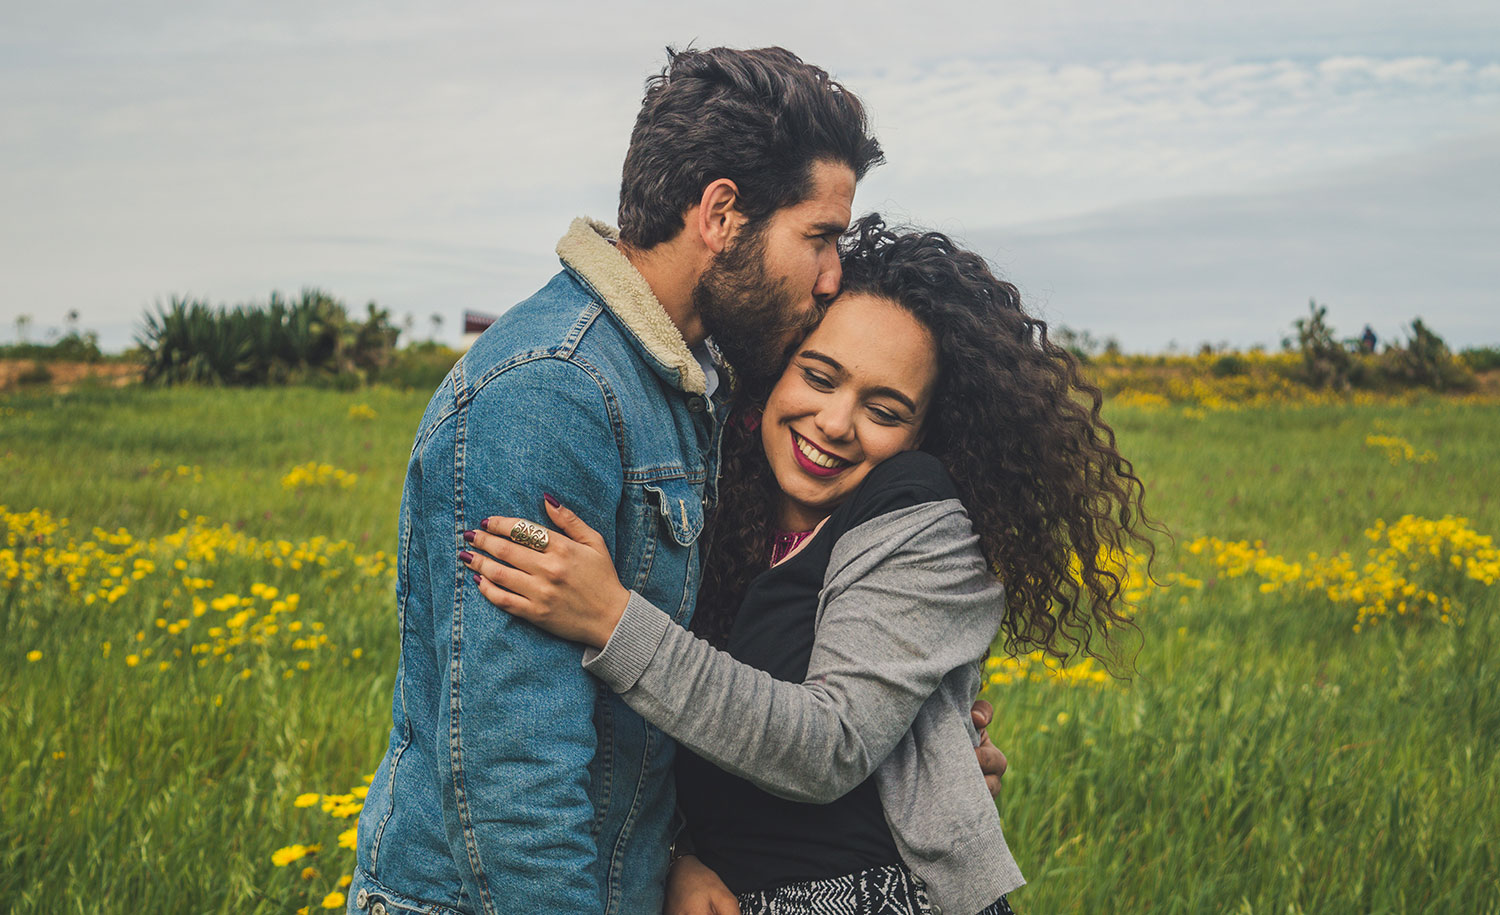 A person hugging their highly sensitive partner in a sunny field, both of them looking happy